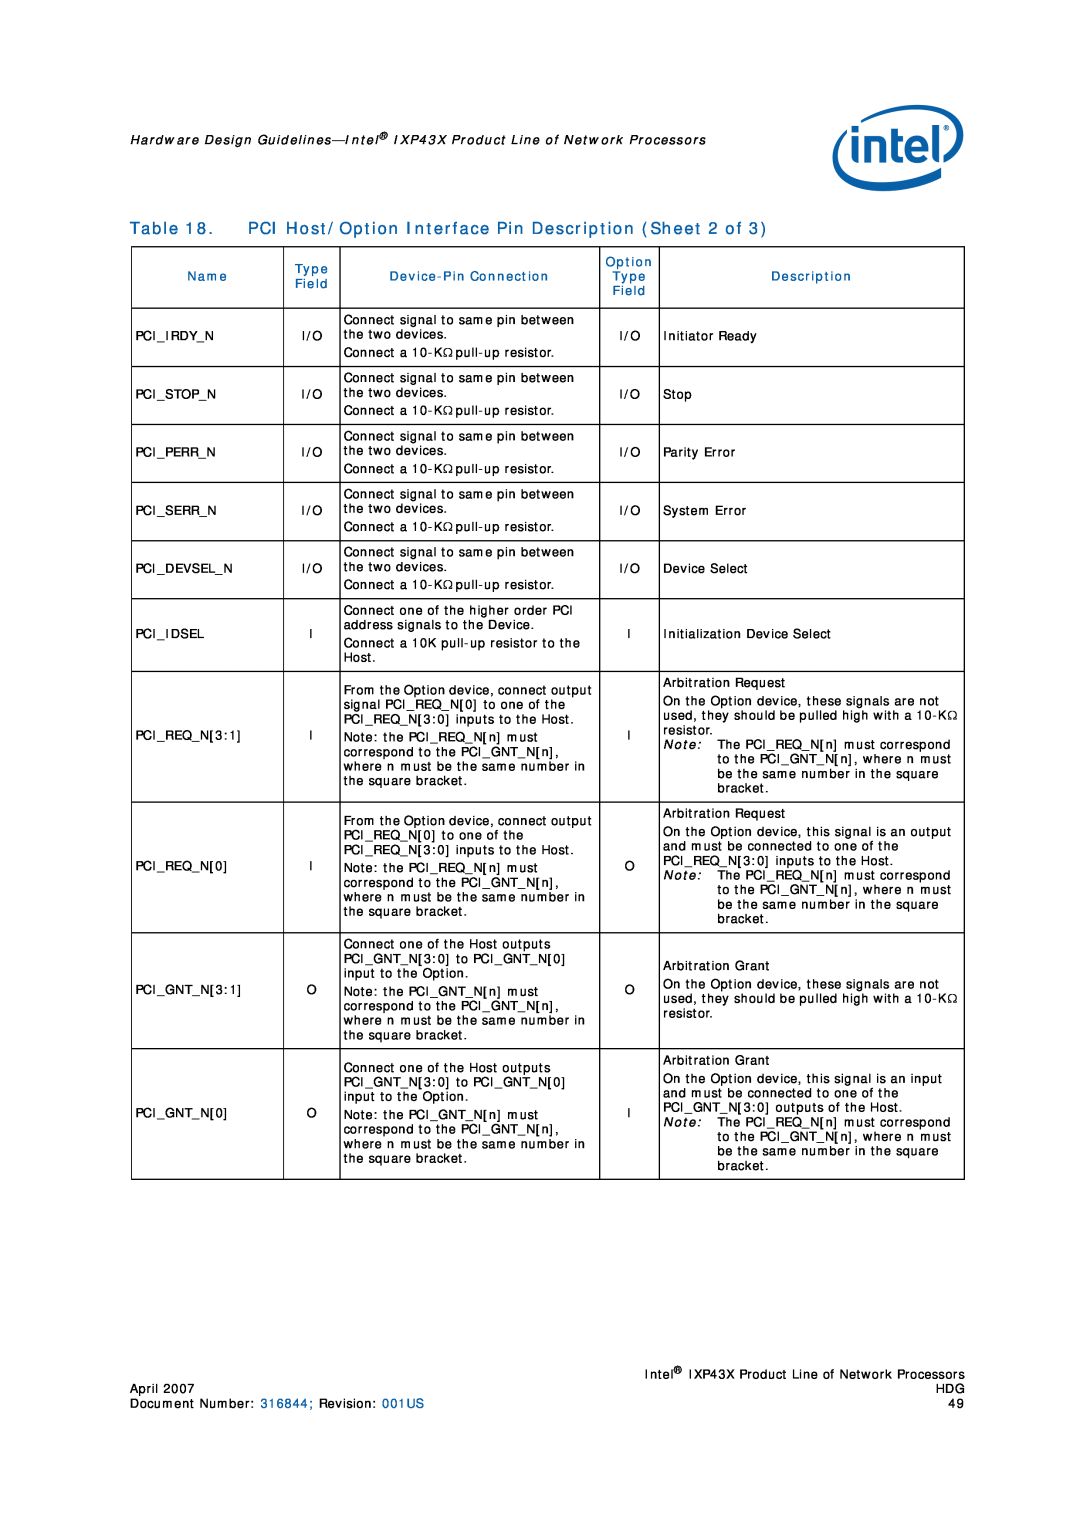 Intel IXP43X manual PCI Host/Option Interface Pin Description Sheet 2 of, Type, Name, Device-Pin Connection, Field 